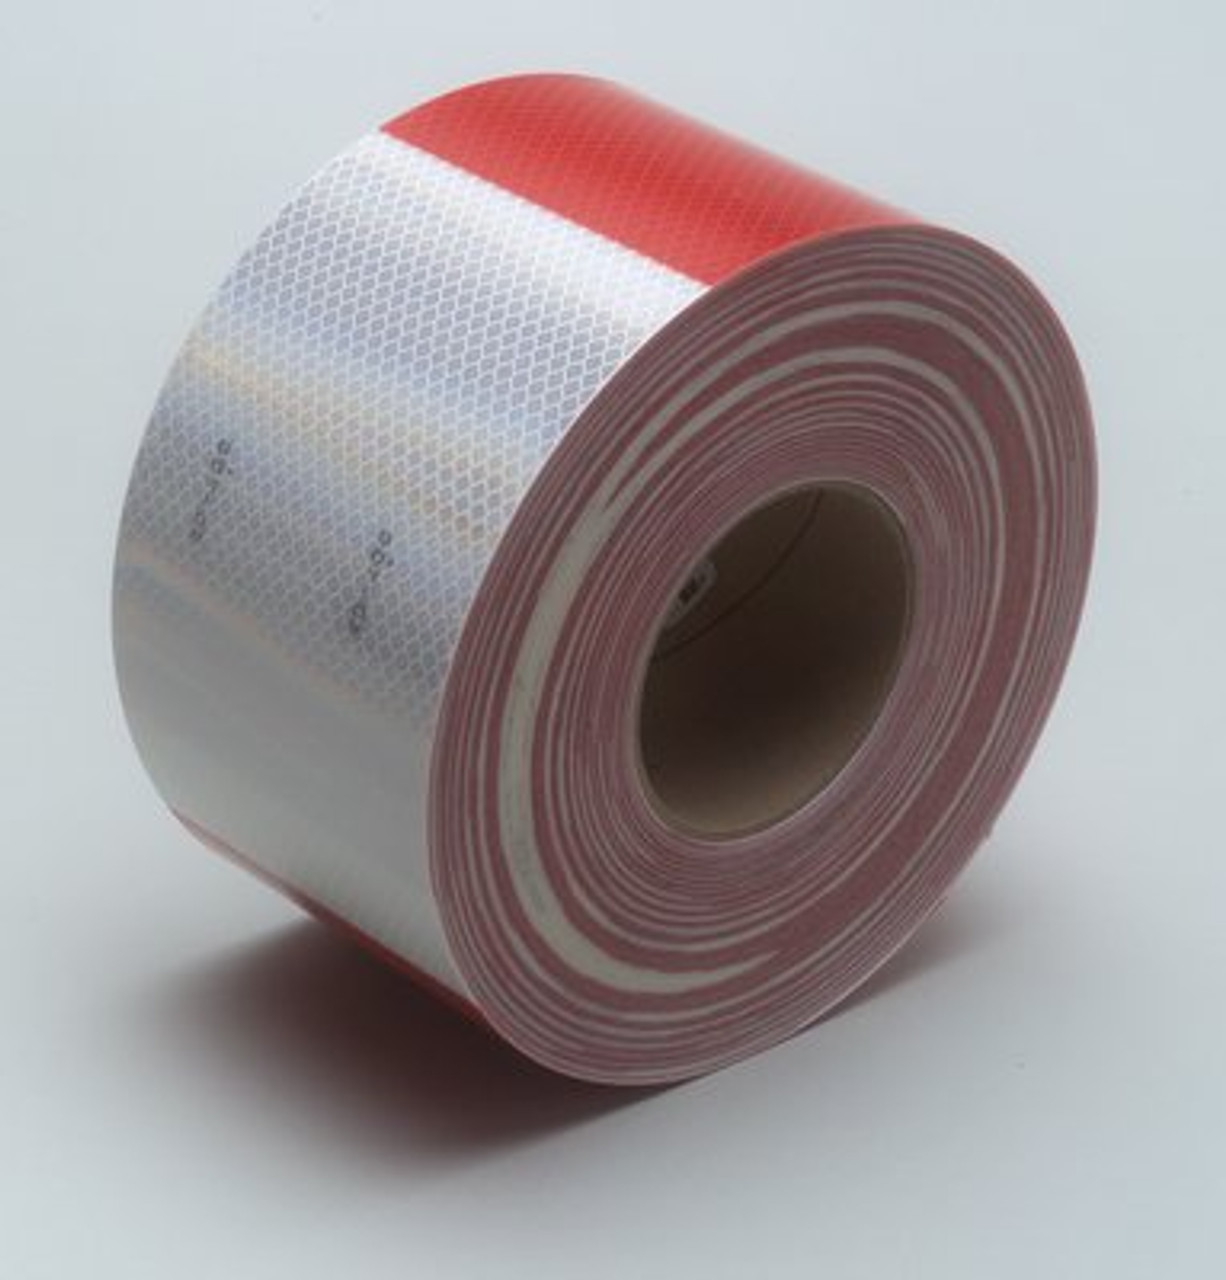 3M™ Diamond Grade™ Conspicuity Markings 983-32, Red/White, 4 in x 50 yd